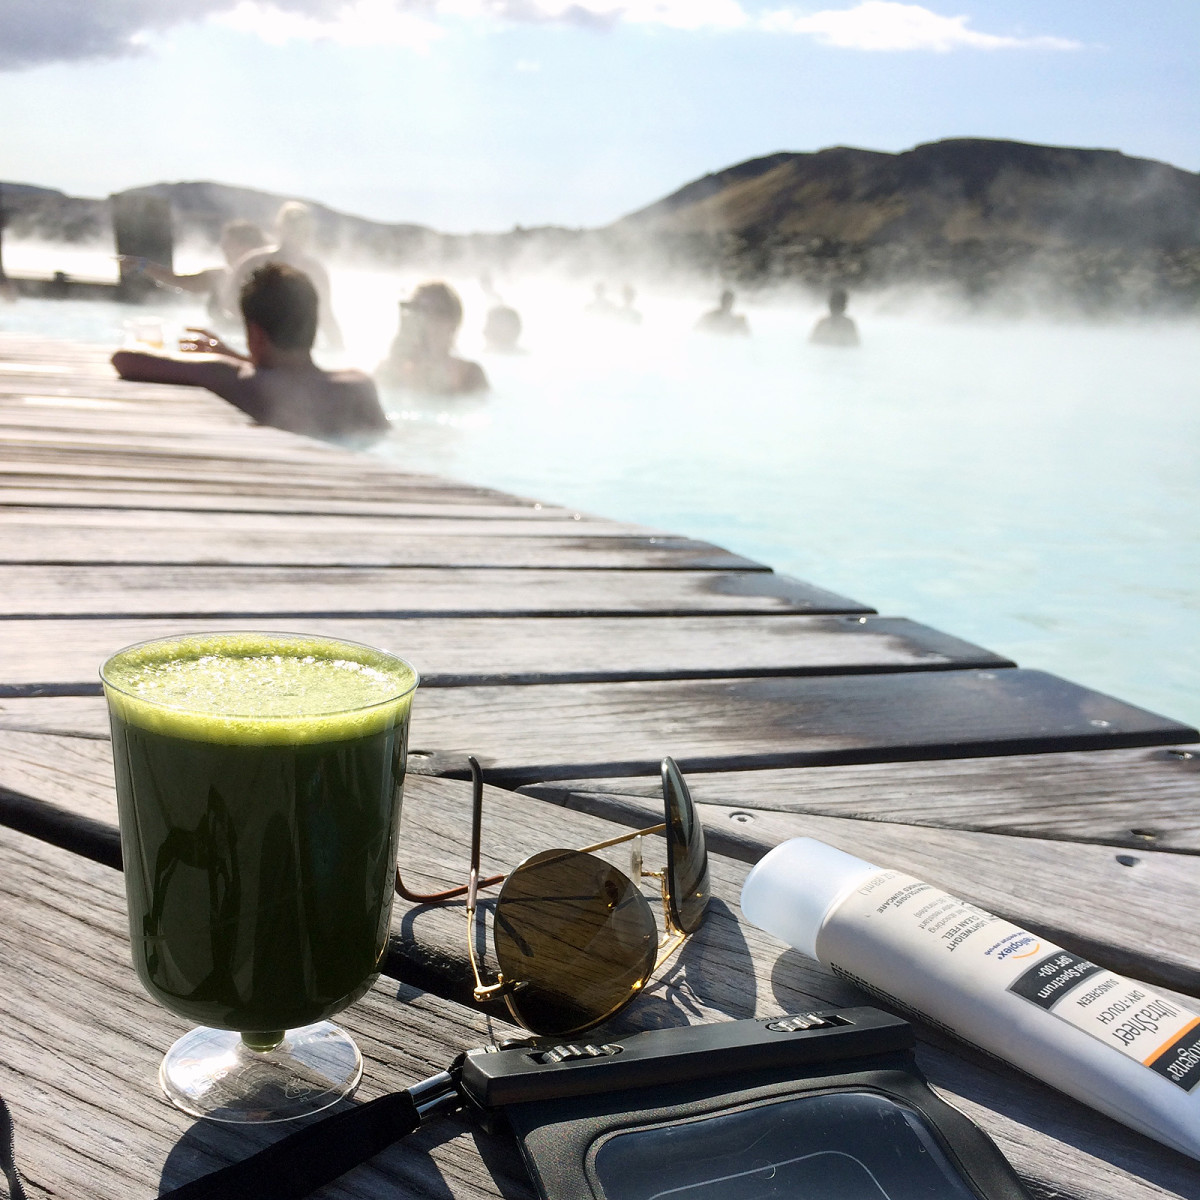 Neutrogena Ultra Sheer Dry Touch SPF 100+ sunscreen at Blue Lagoon, Iceland